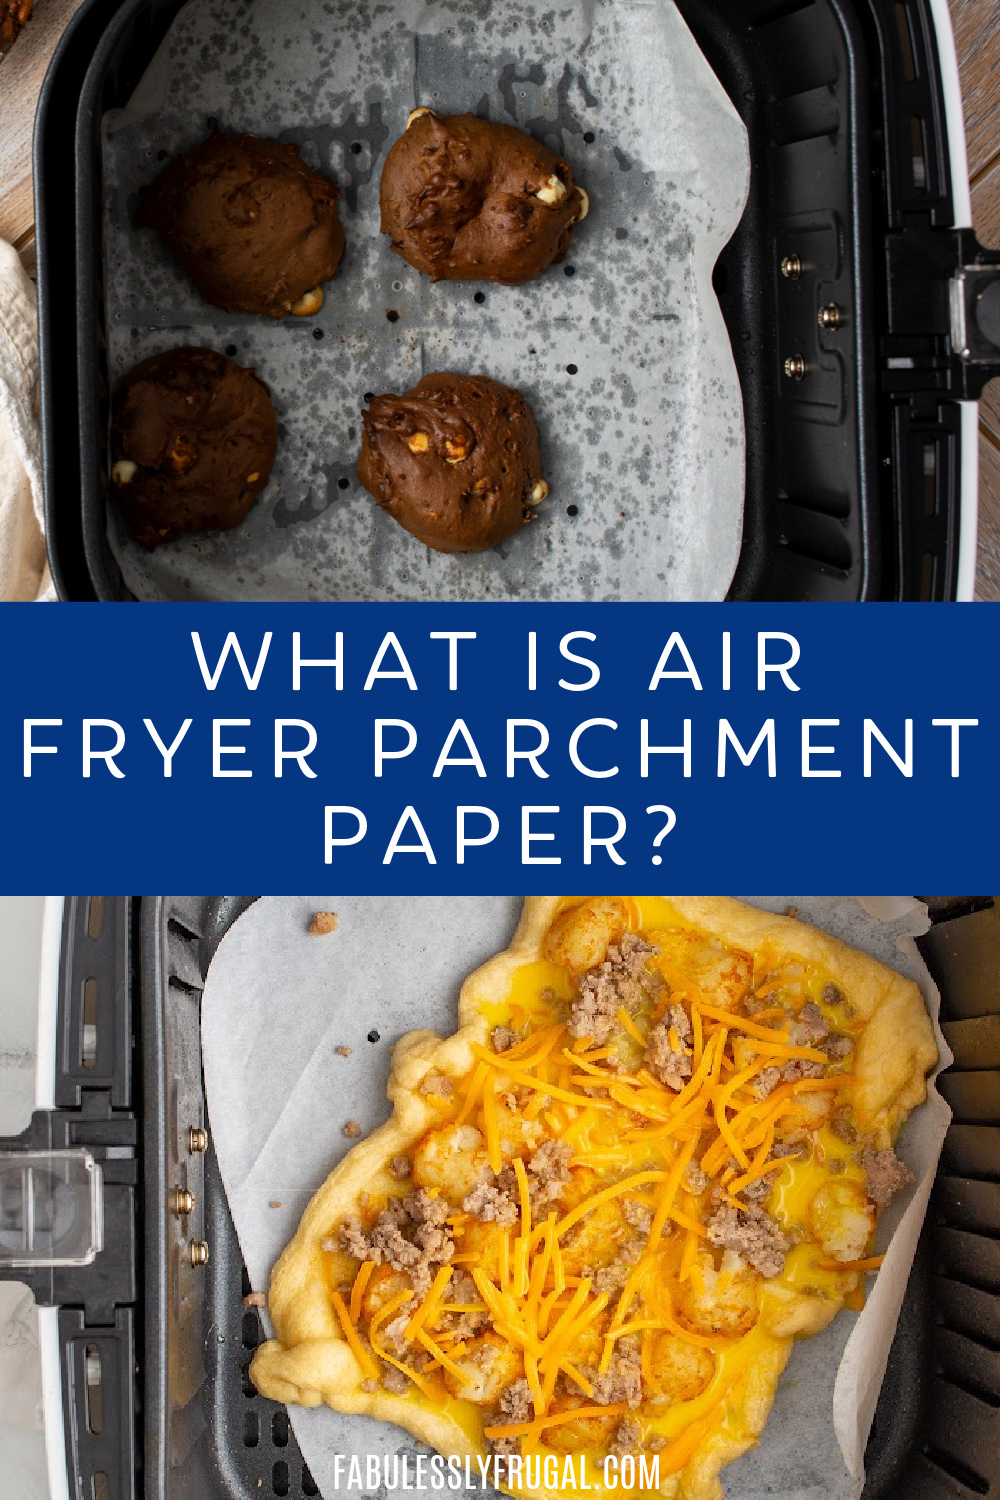 Can you use parchment paper in an air fryer? – KALHOOF